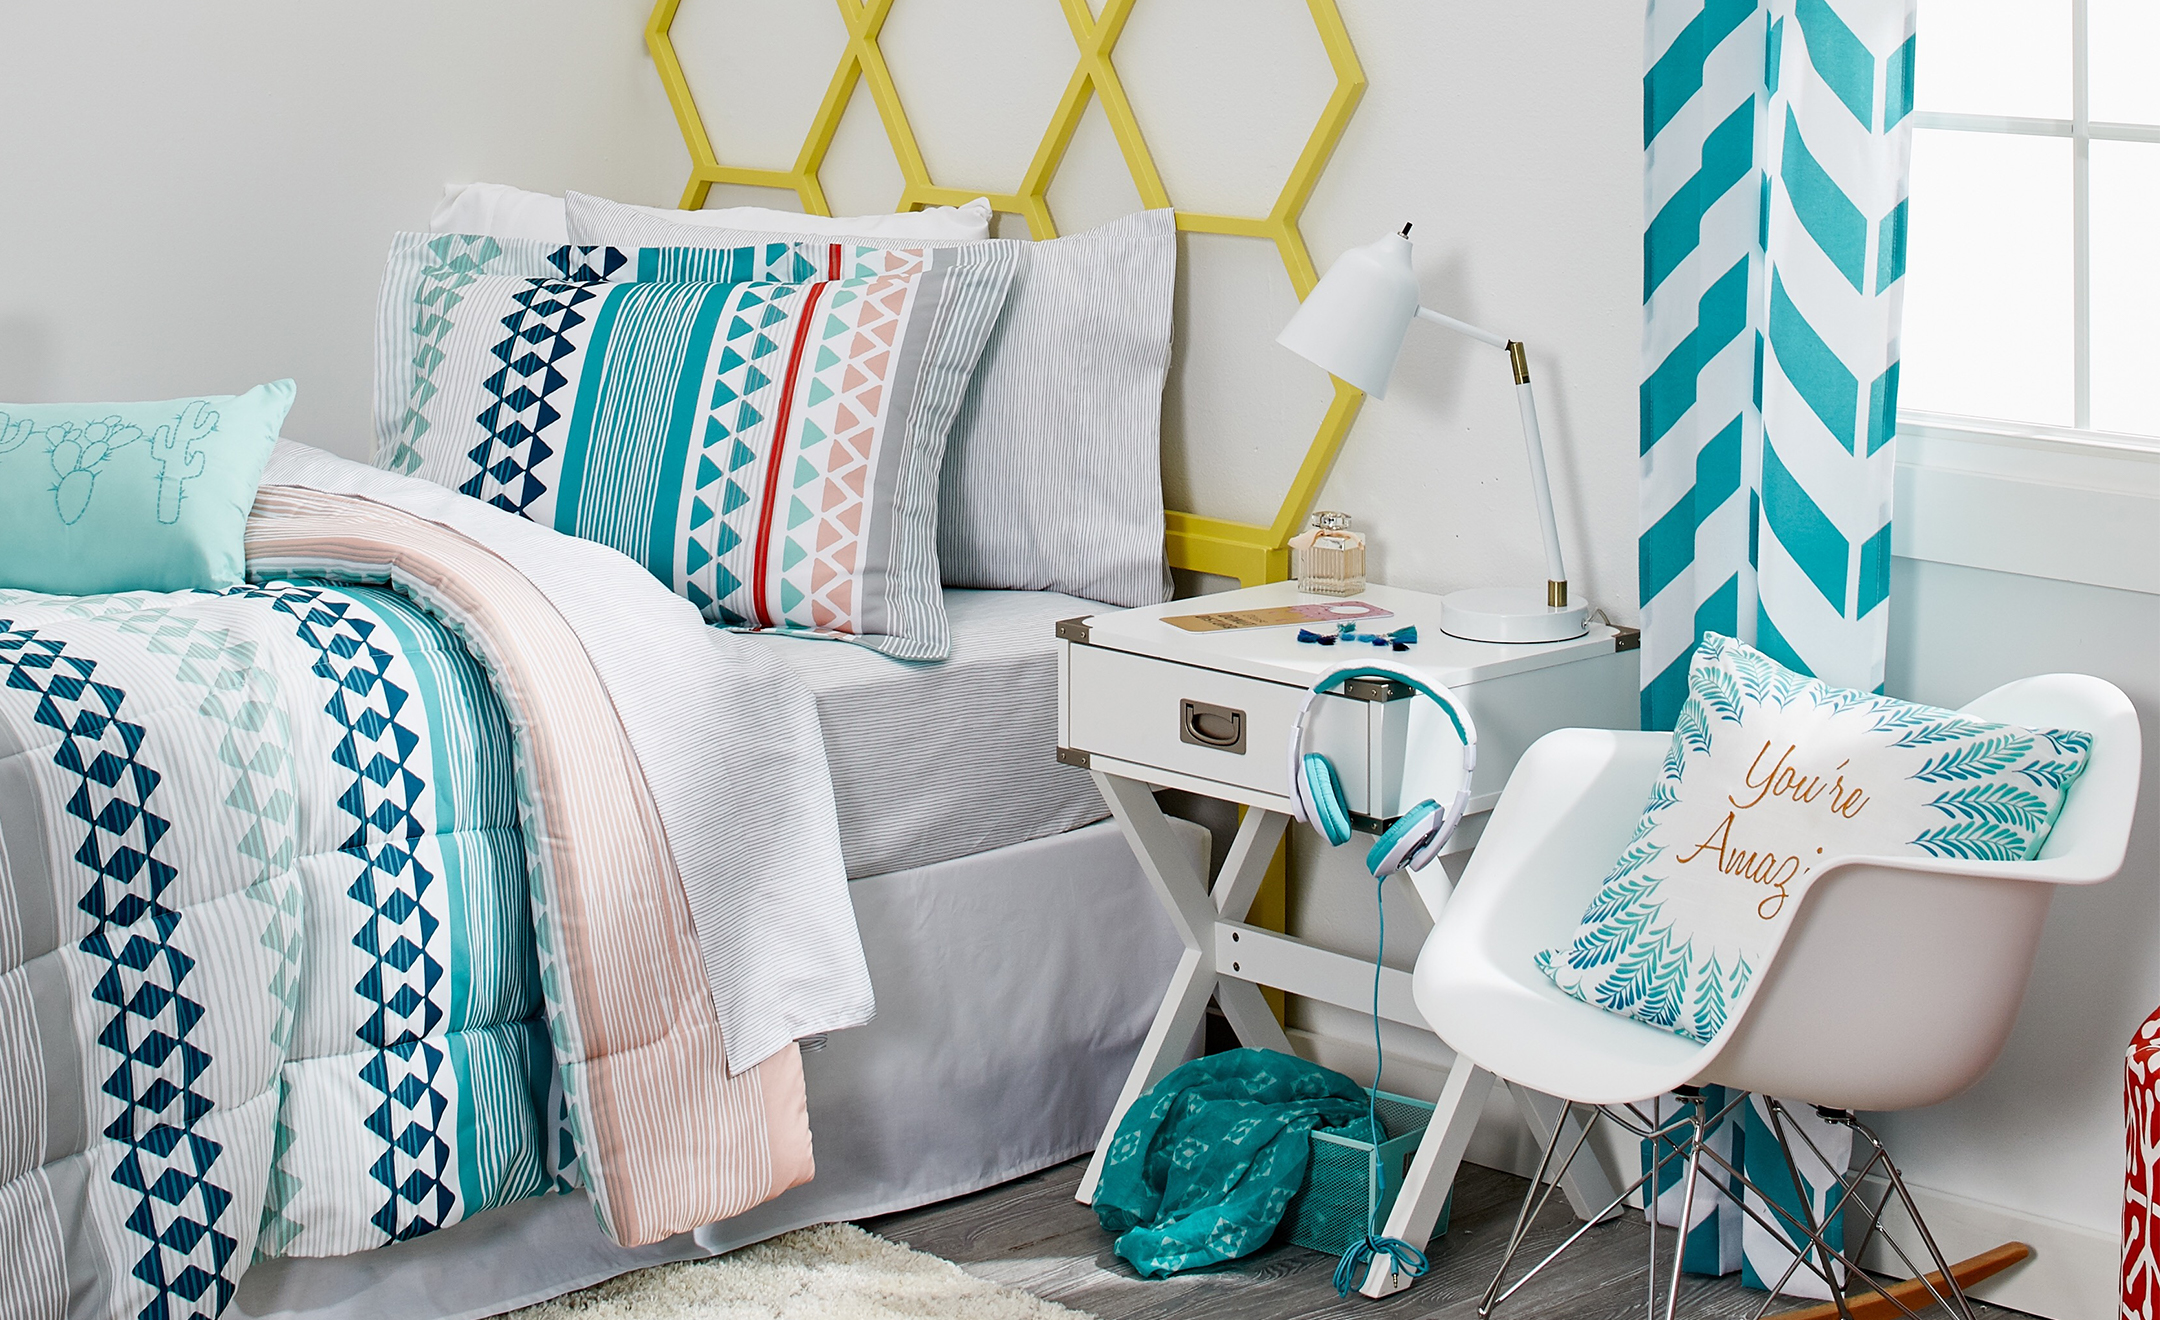 10+ Dorm Room Storage Ideas to Maximize your Spaces